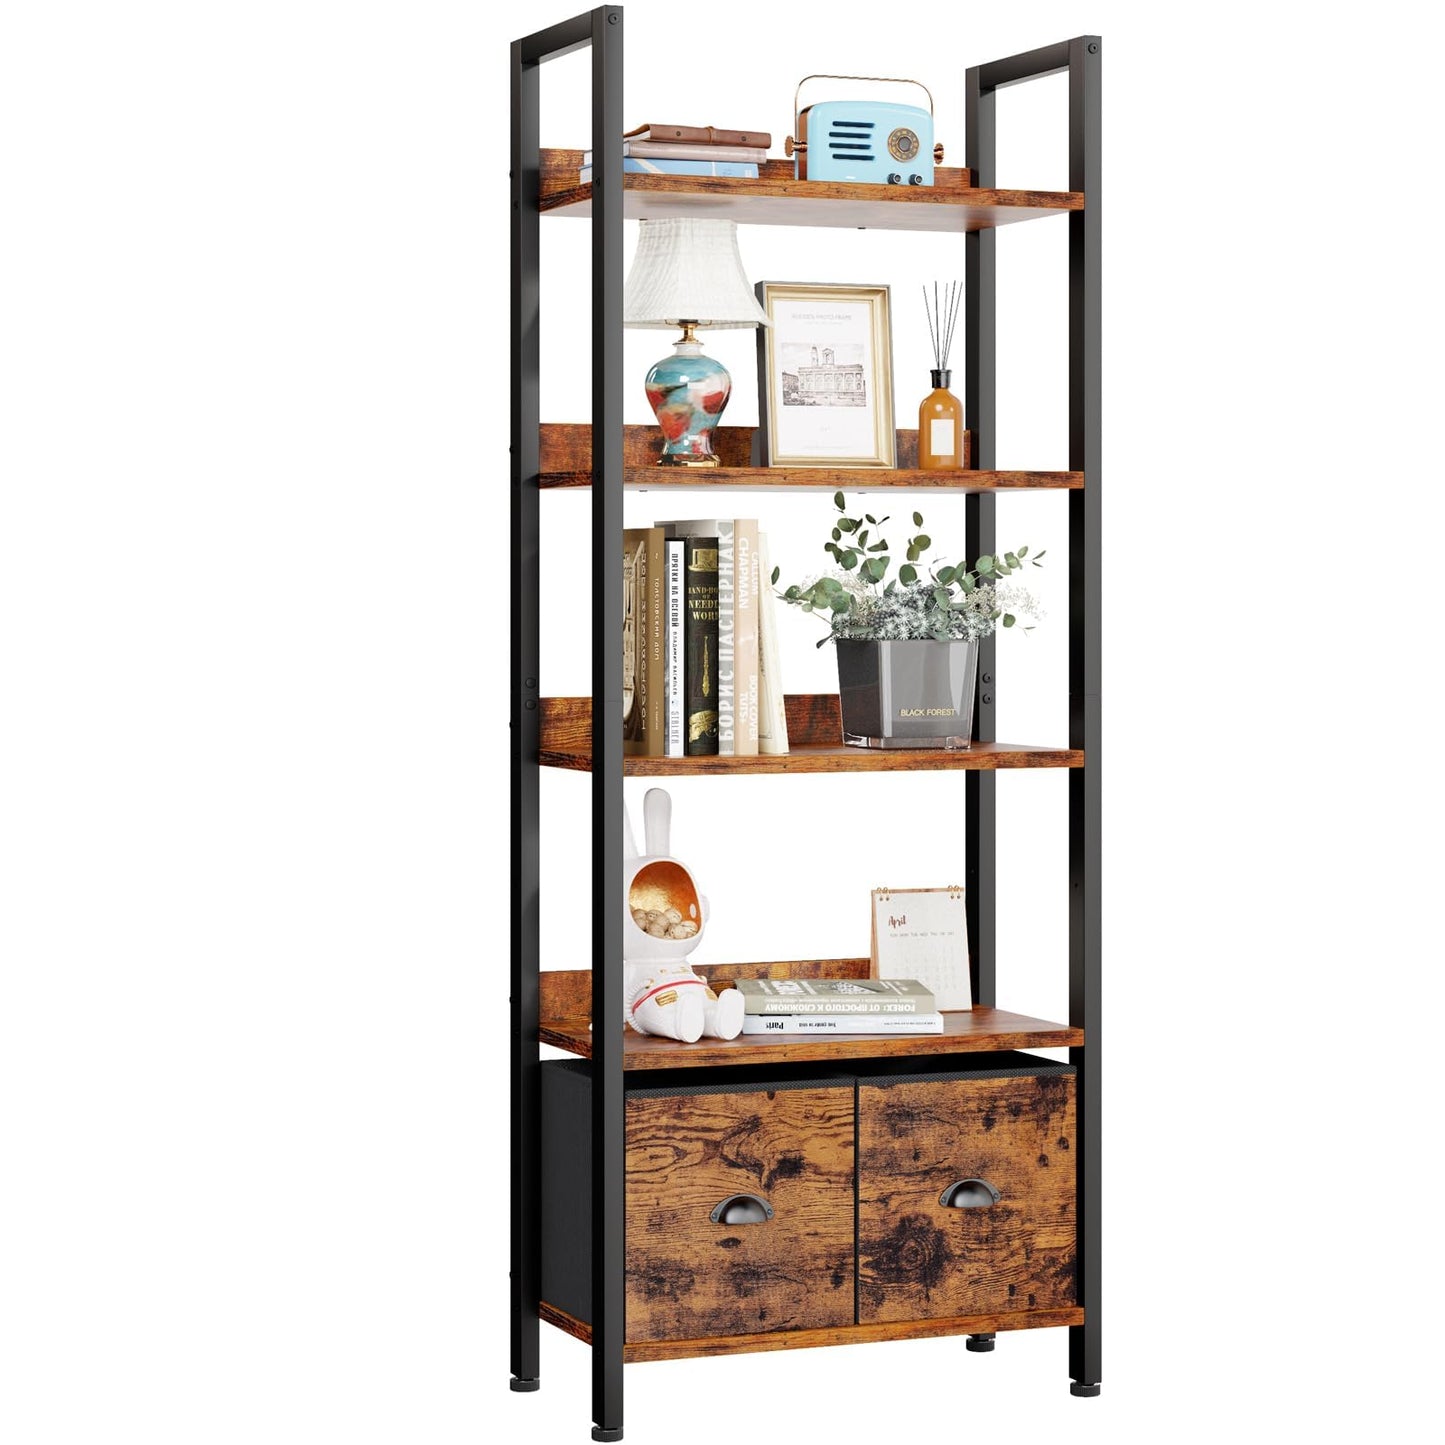 Furologee 5-Tier Bookshelf, Tall Bookcase with 2 Storage Drawers, Industrial Display Standing Shelf Units, Wood and Metal Storage Shelf for Living